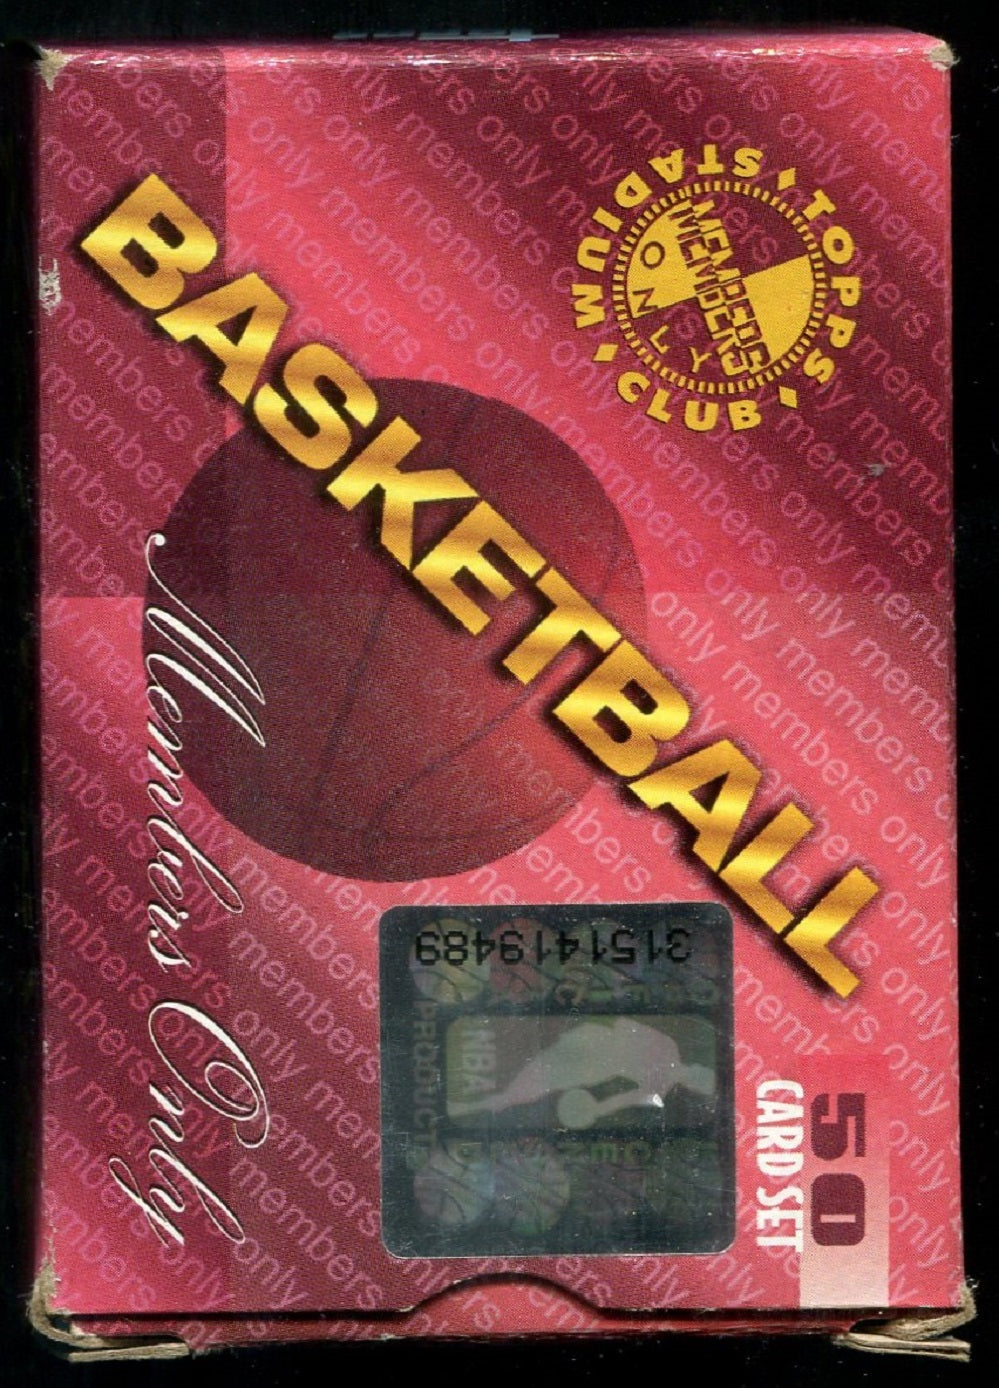 1995 Topps Stadium Club Basketball Members Only Factory Set (50)